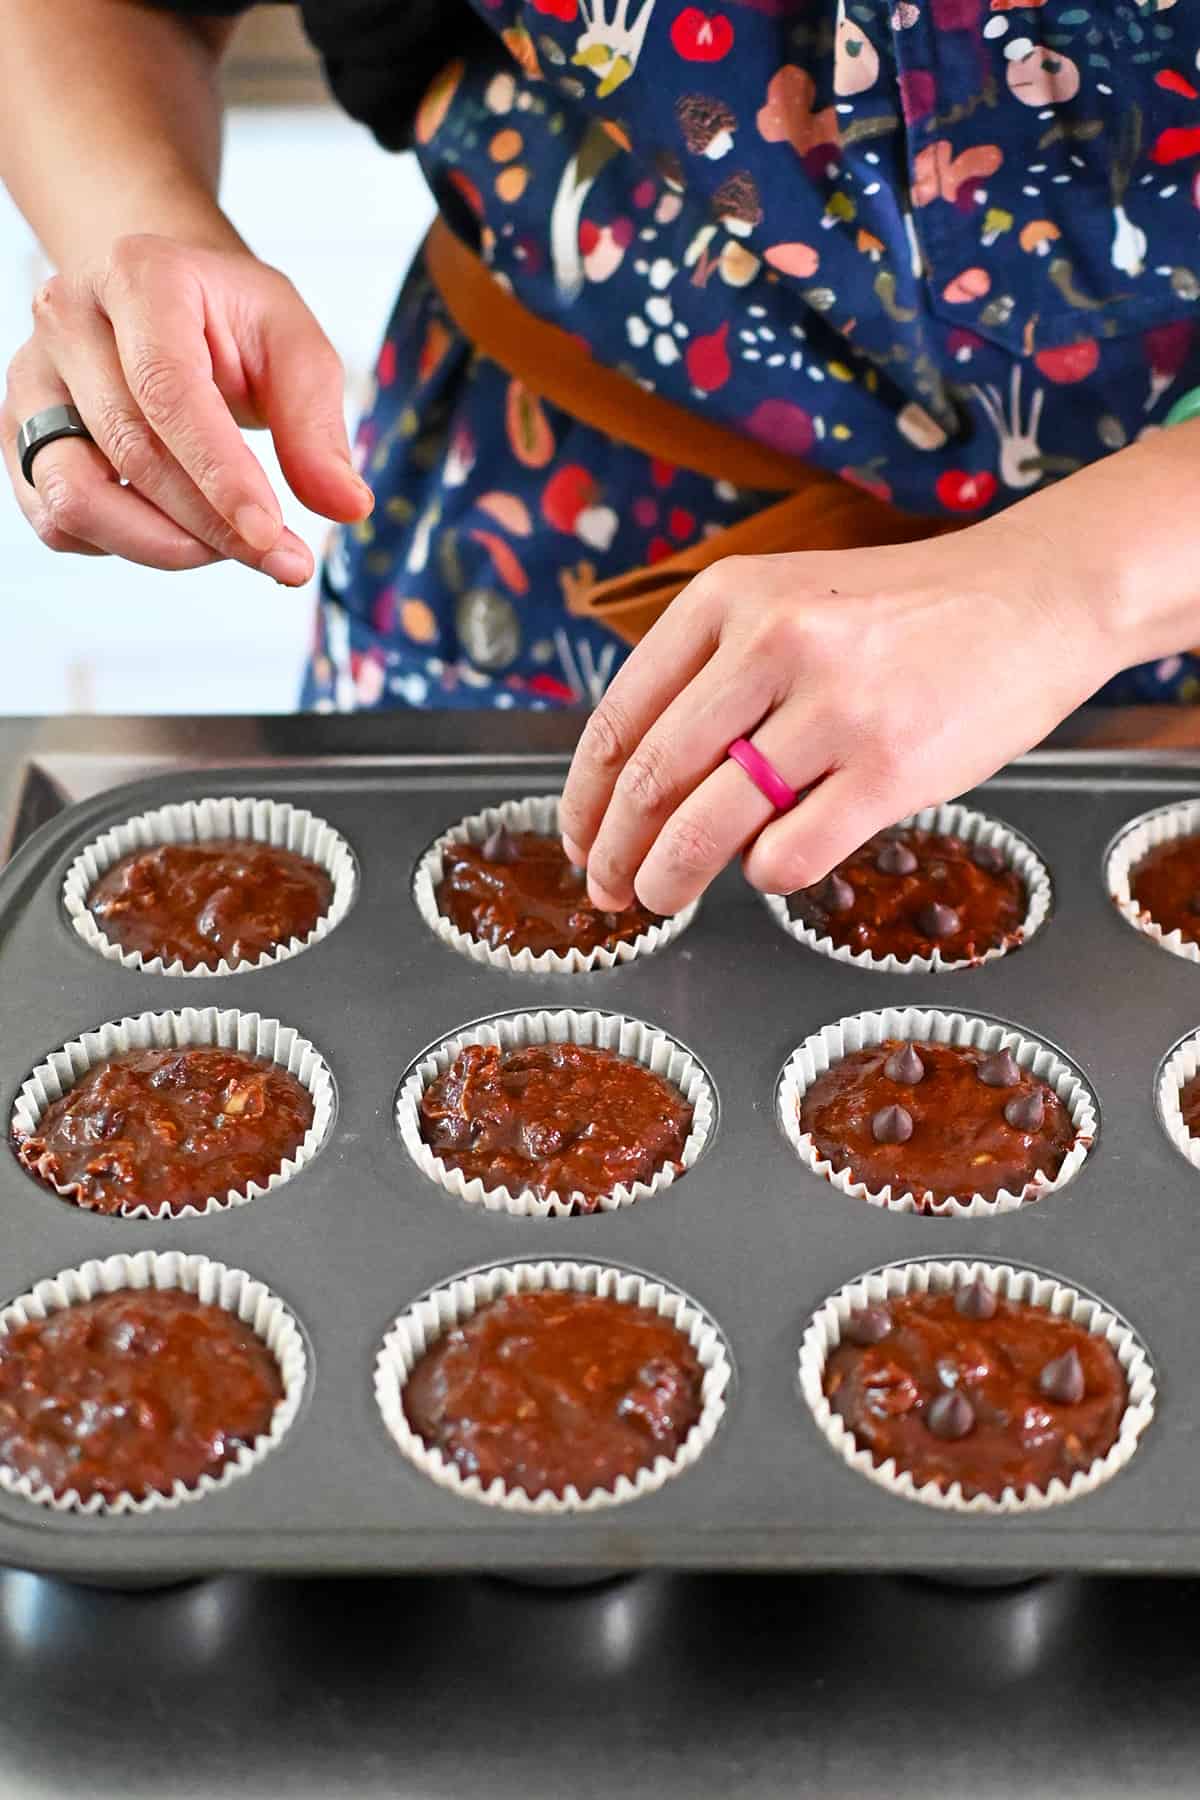 Adding extra chocolate chips on top of chocolate zucchini muffins before baking them in the oven.